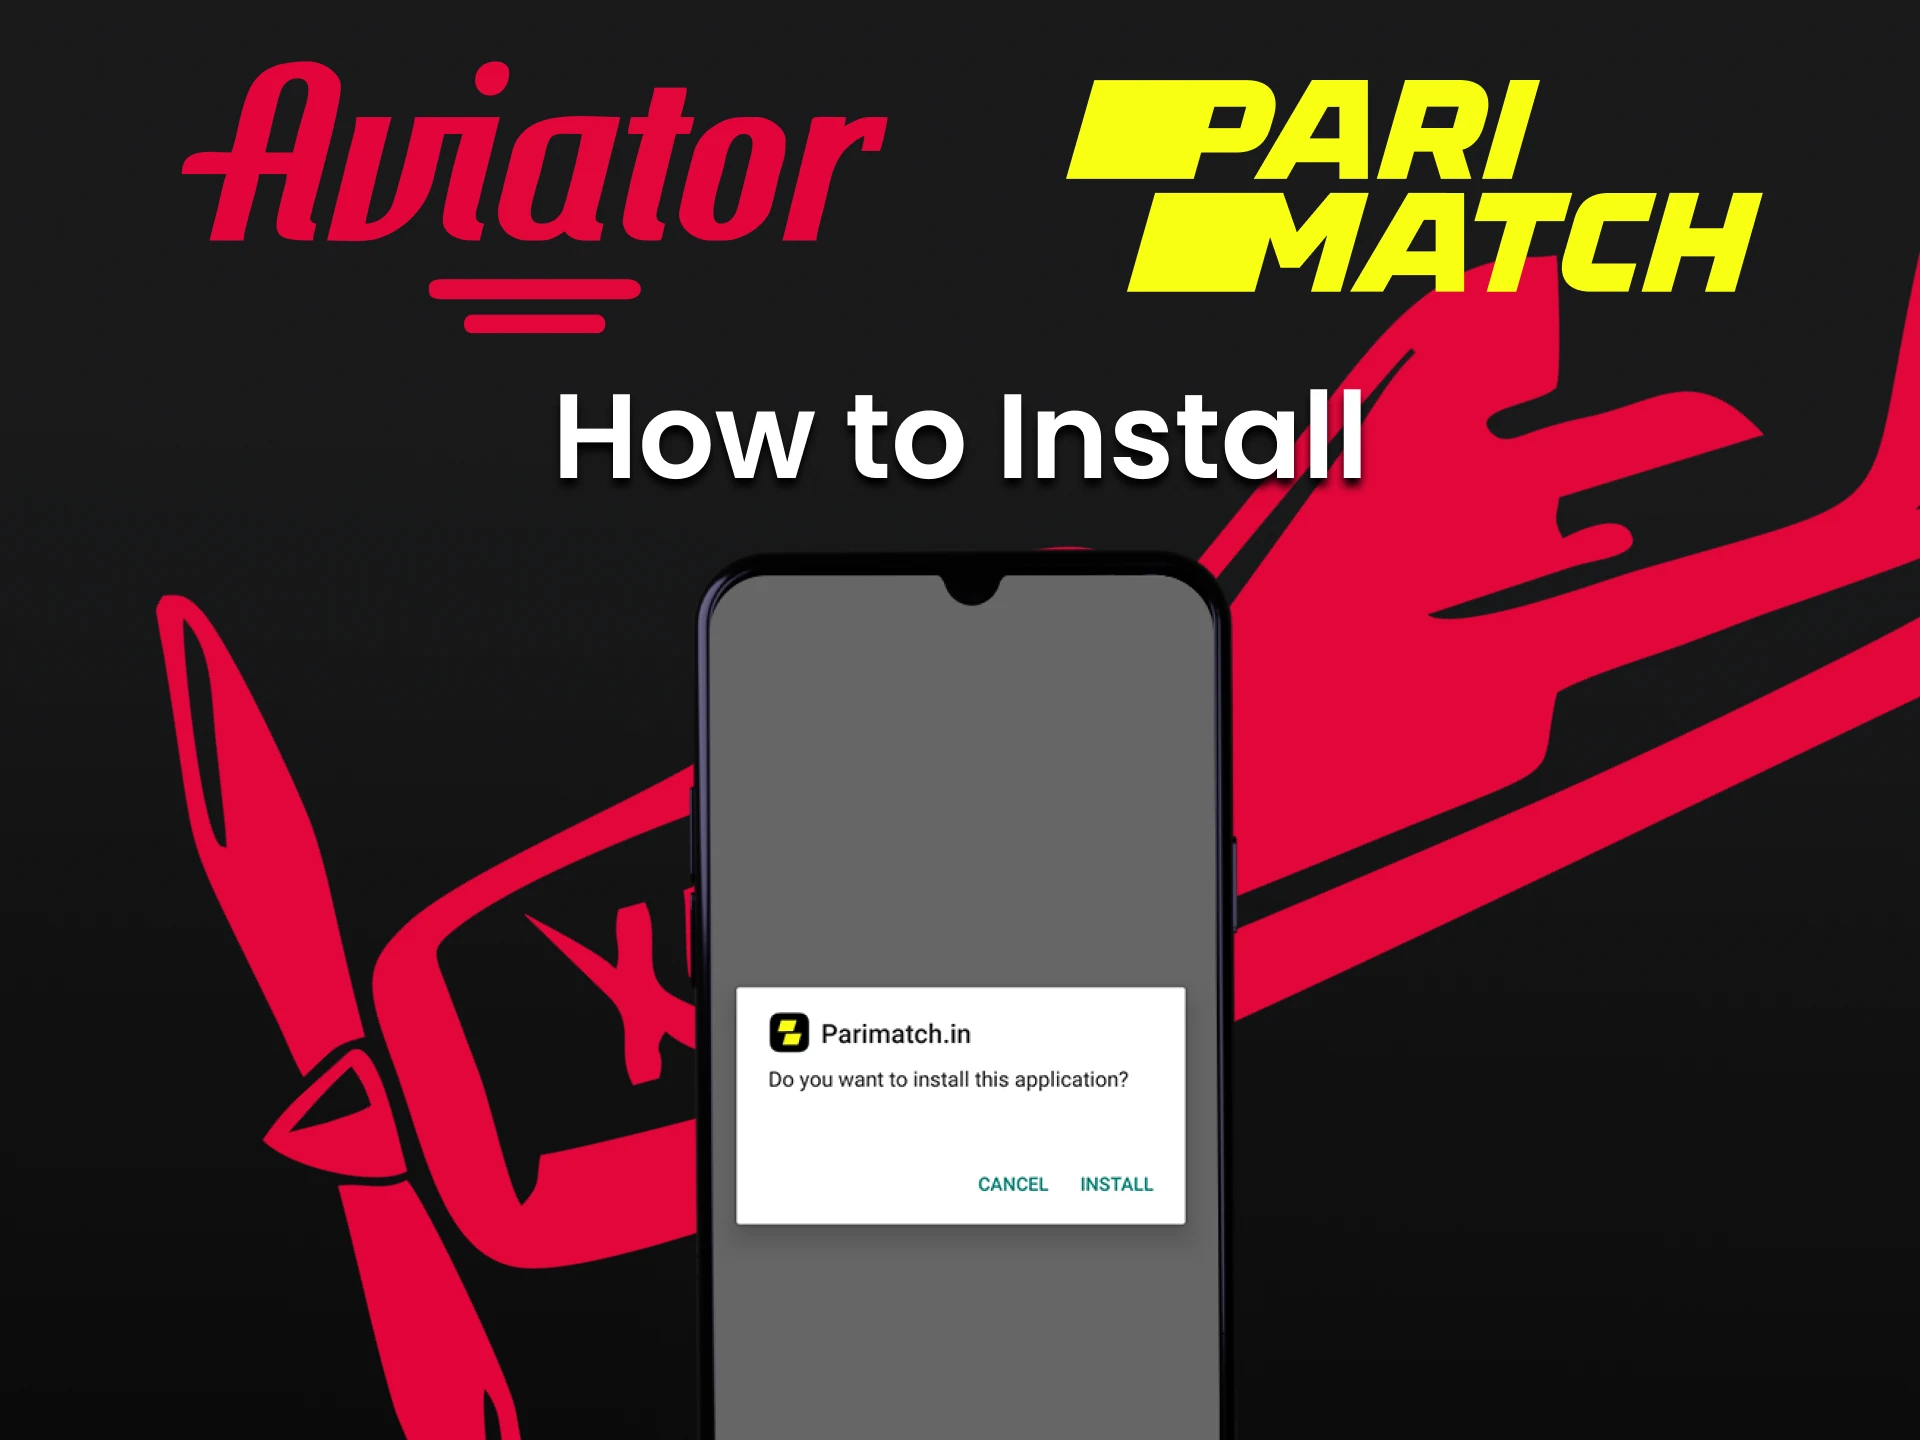 Install the Parimatch app for your phone.